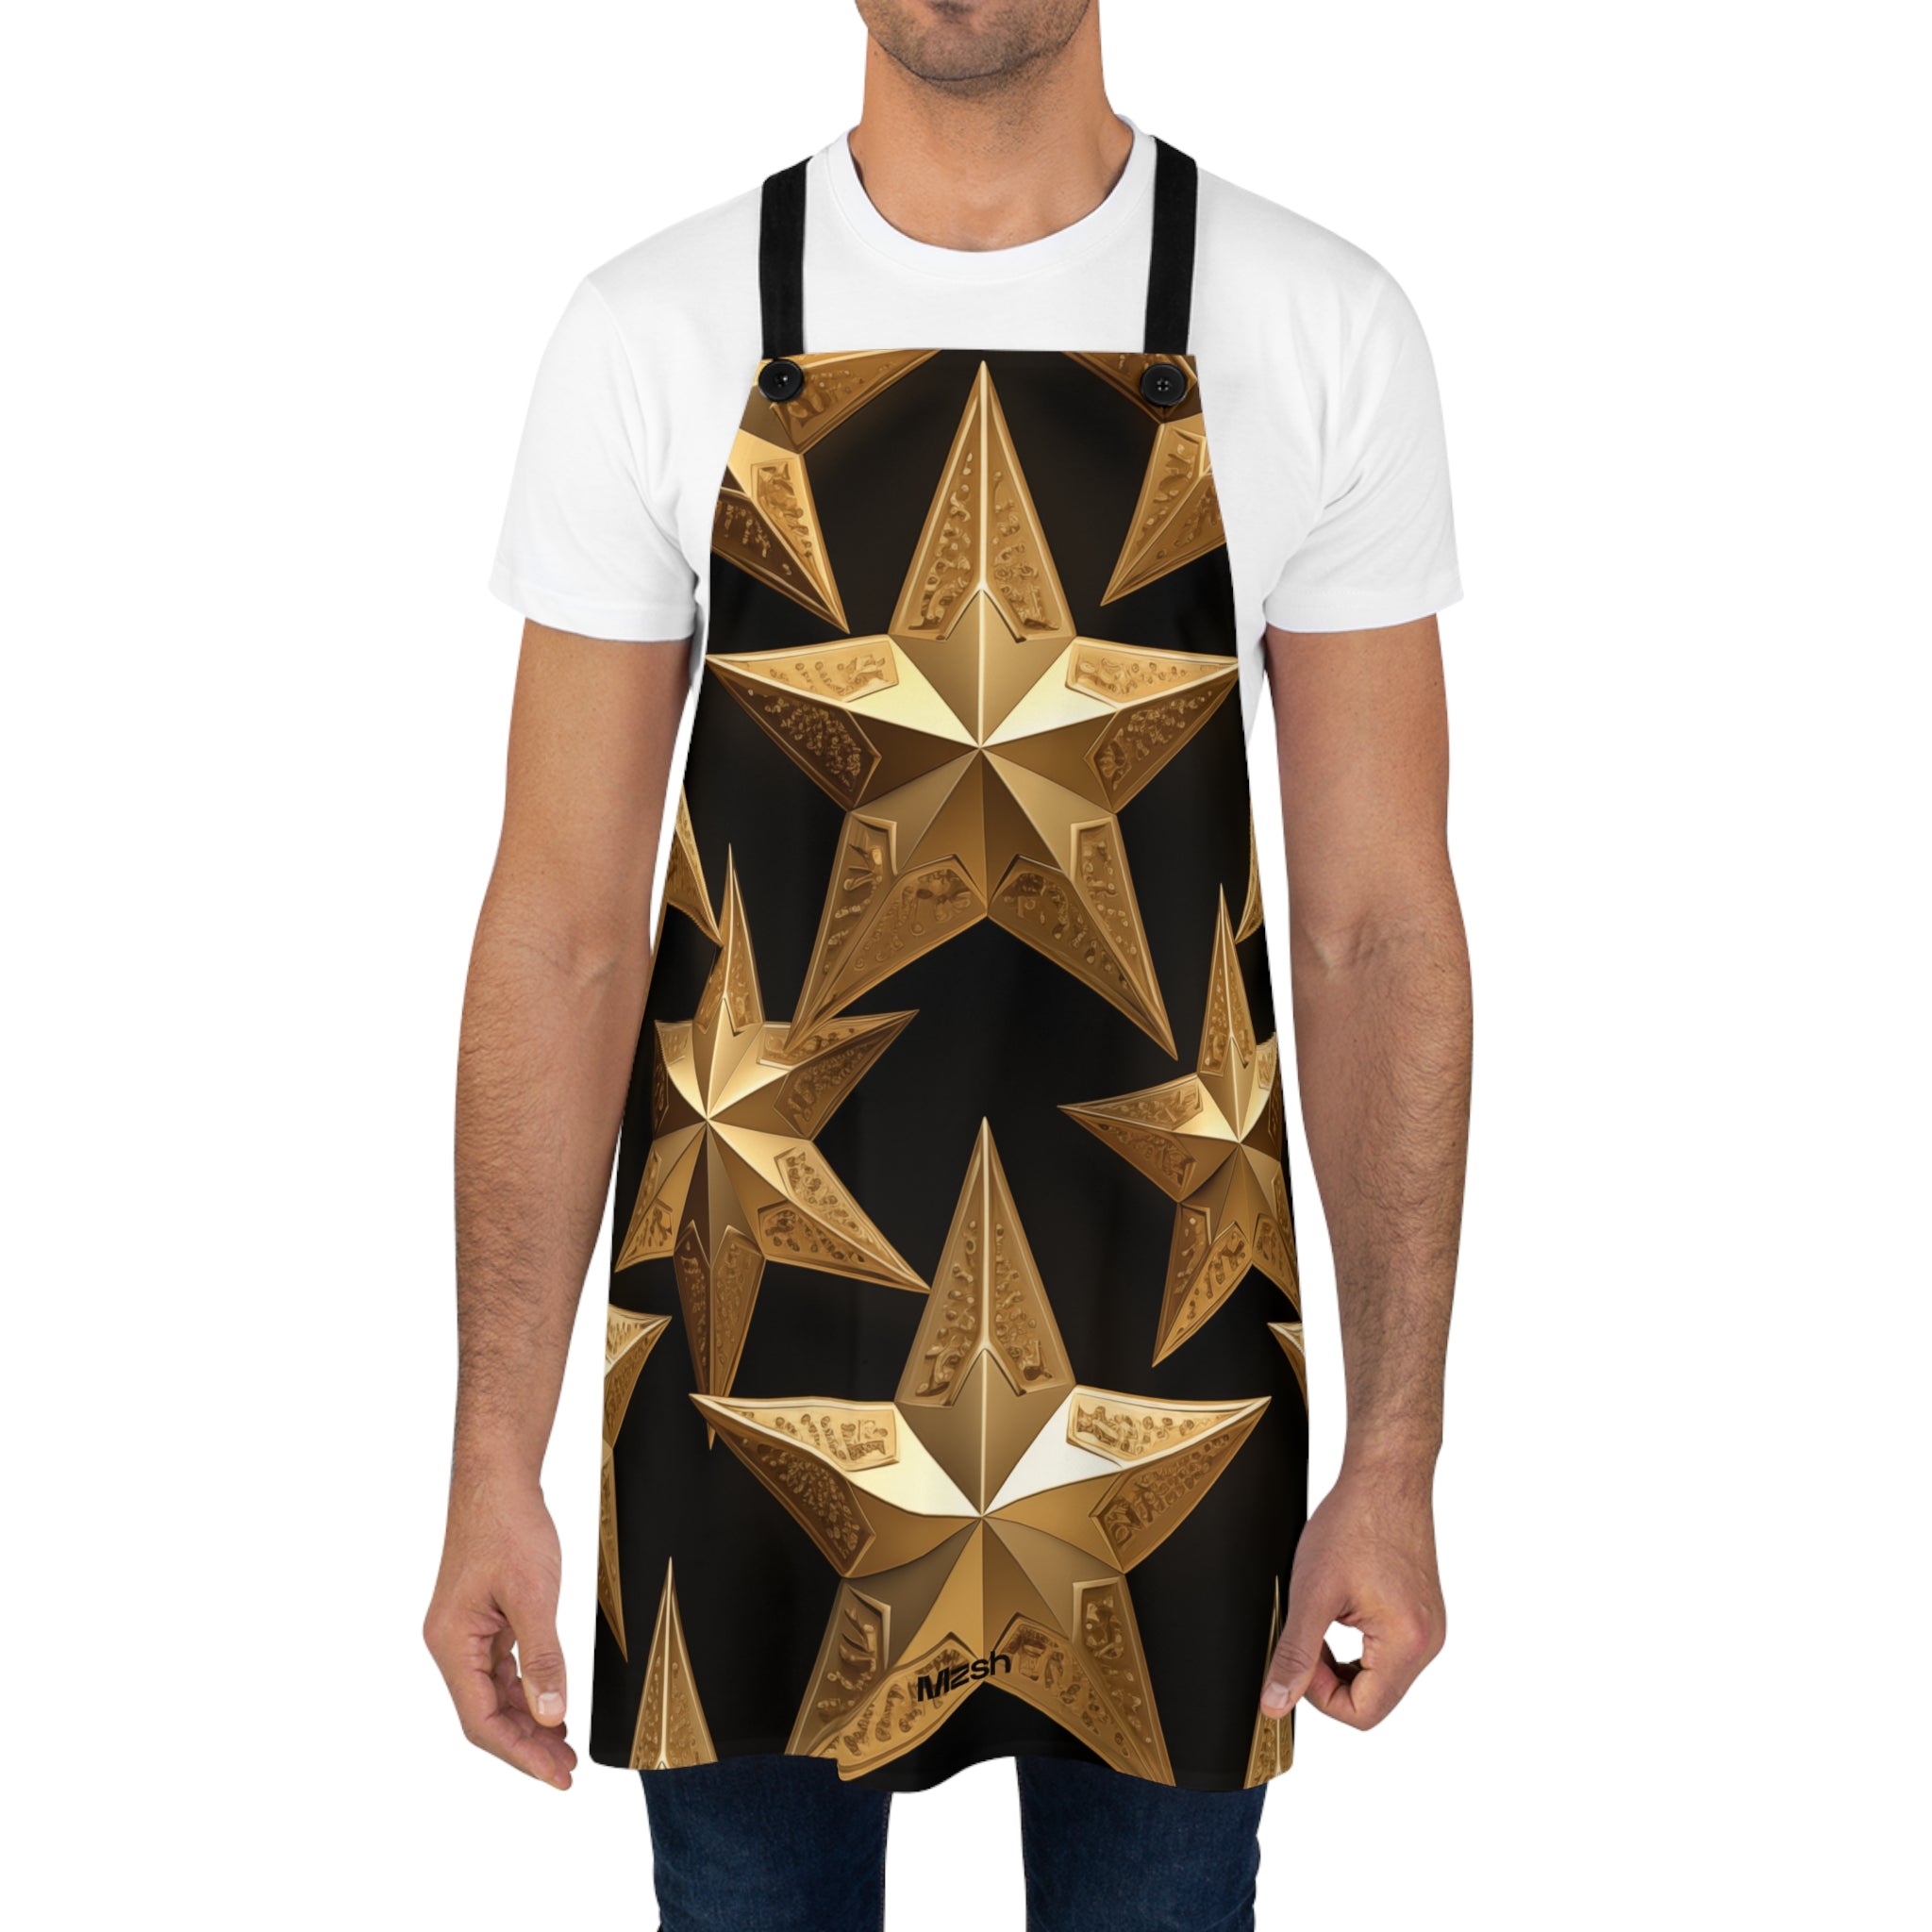 Starry Silhouettes - Apron